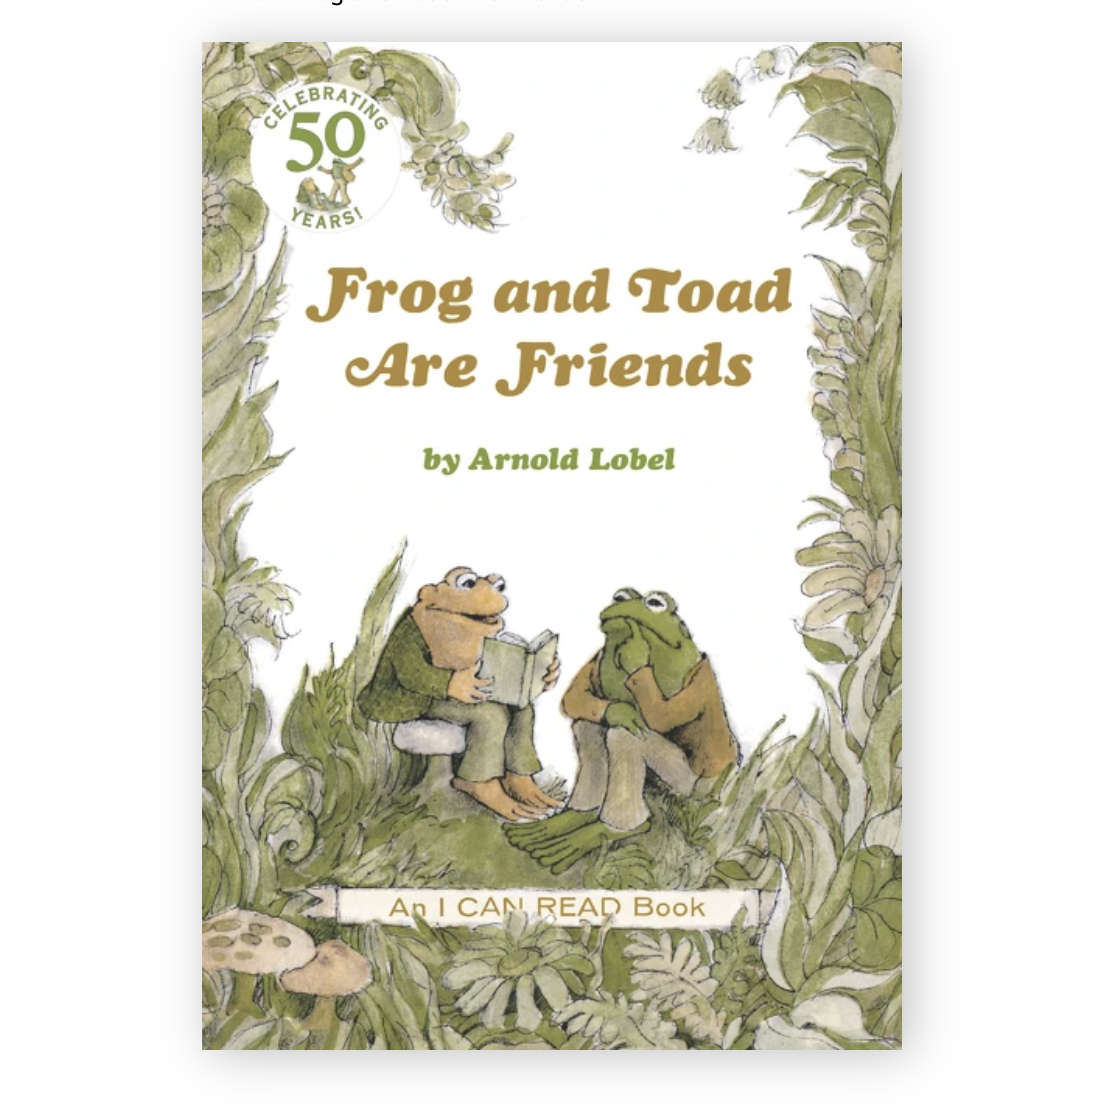 Harper Collins: I Can Read Level 2: Frog and Toad Are Friends-HARPER COLLINS PUBLISHERS-Little Giant Kidz